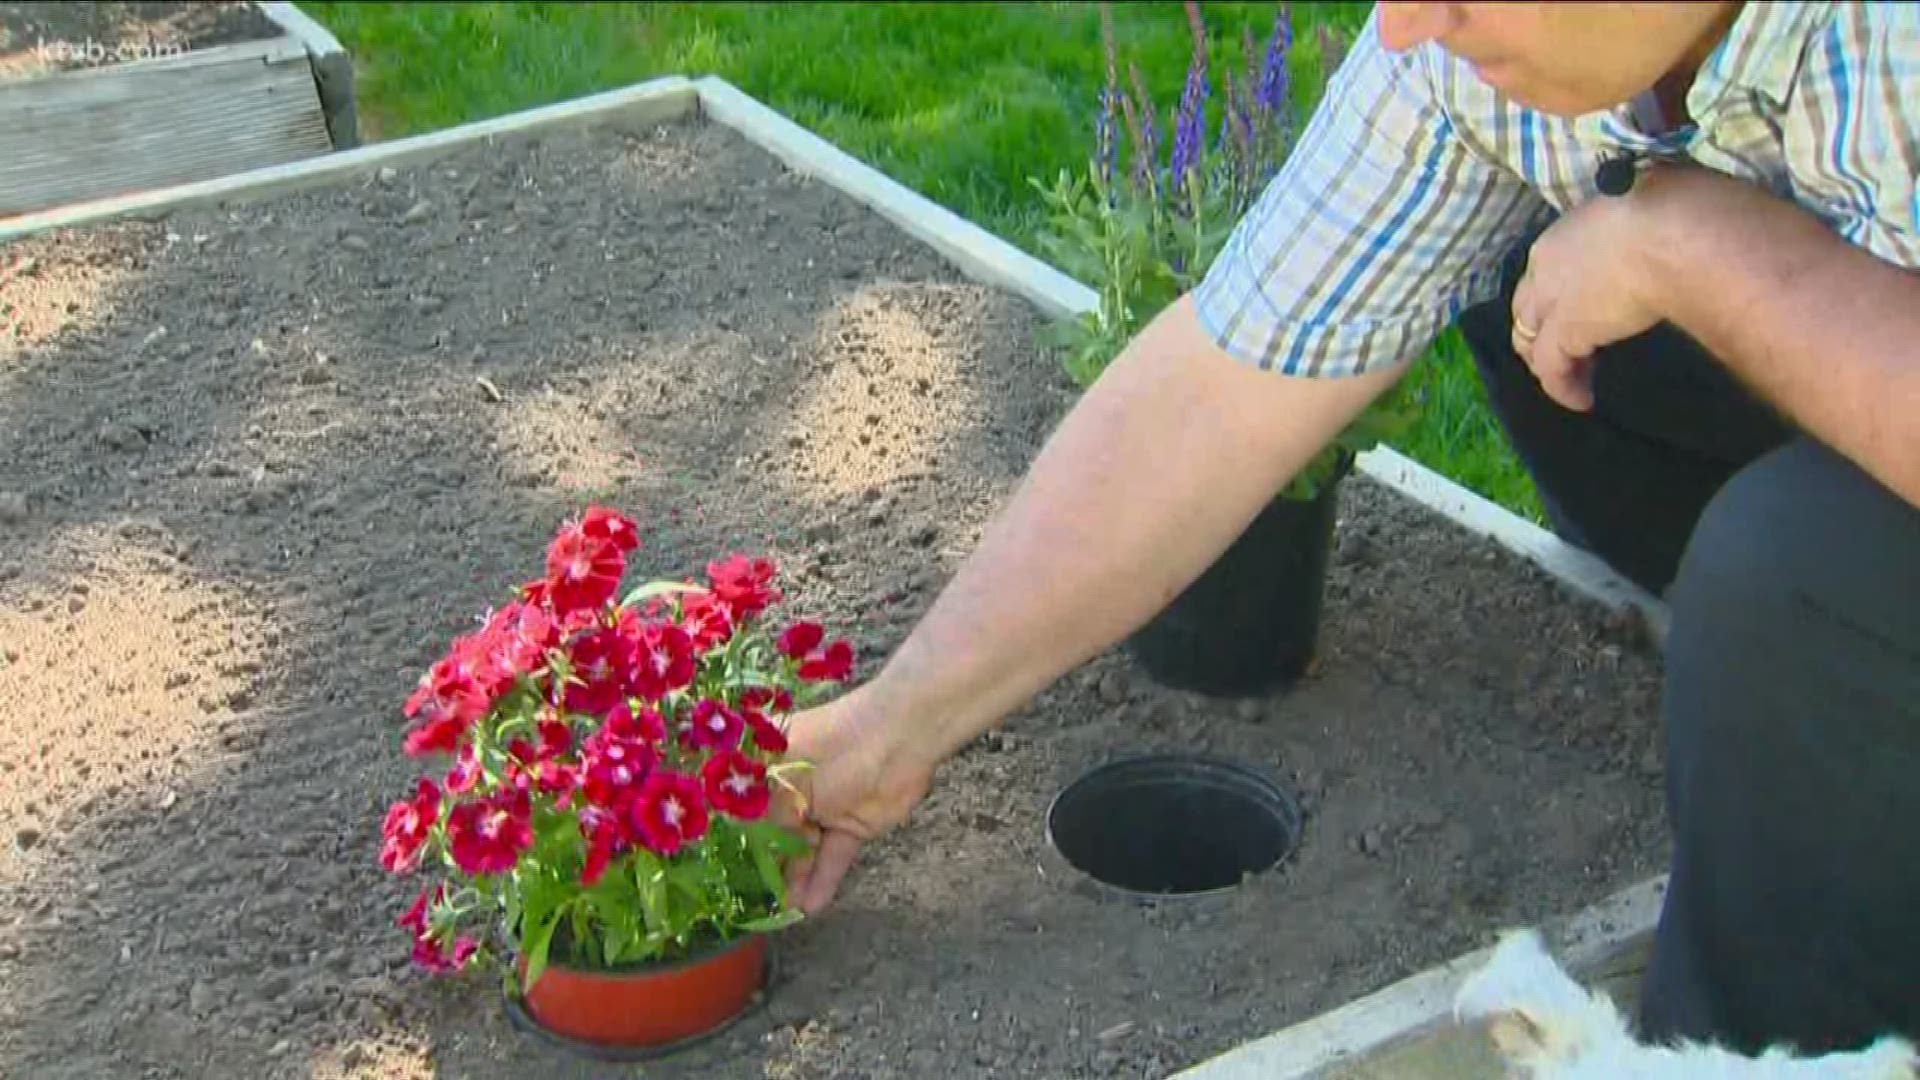 Jim Duthie has more low-cost ideas for your garden.